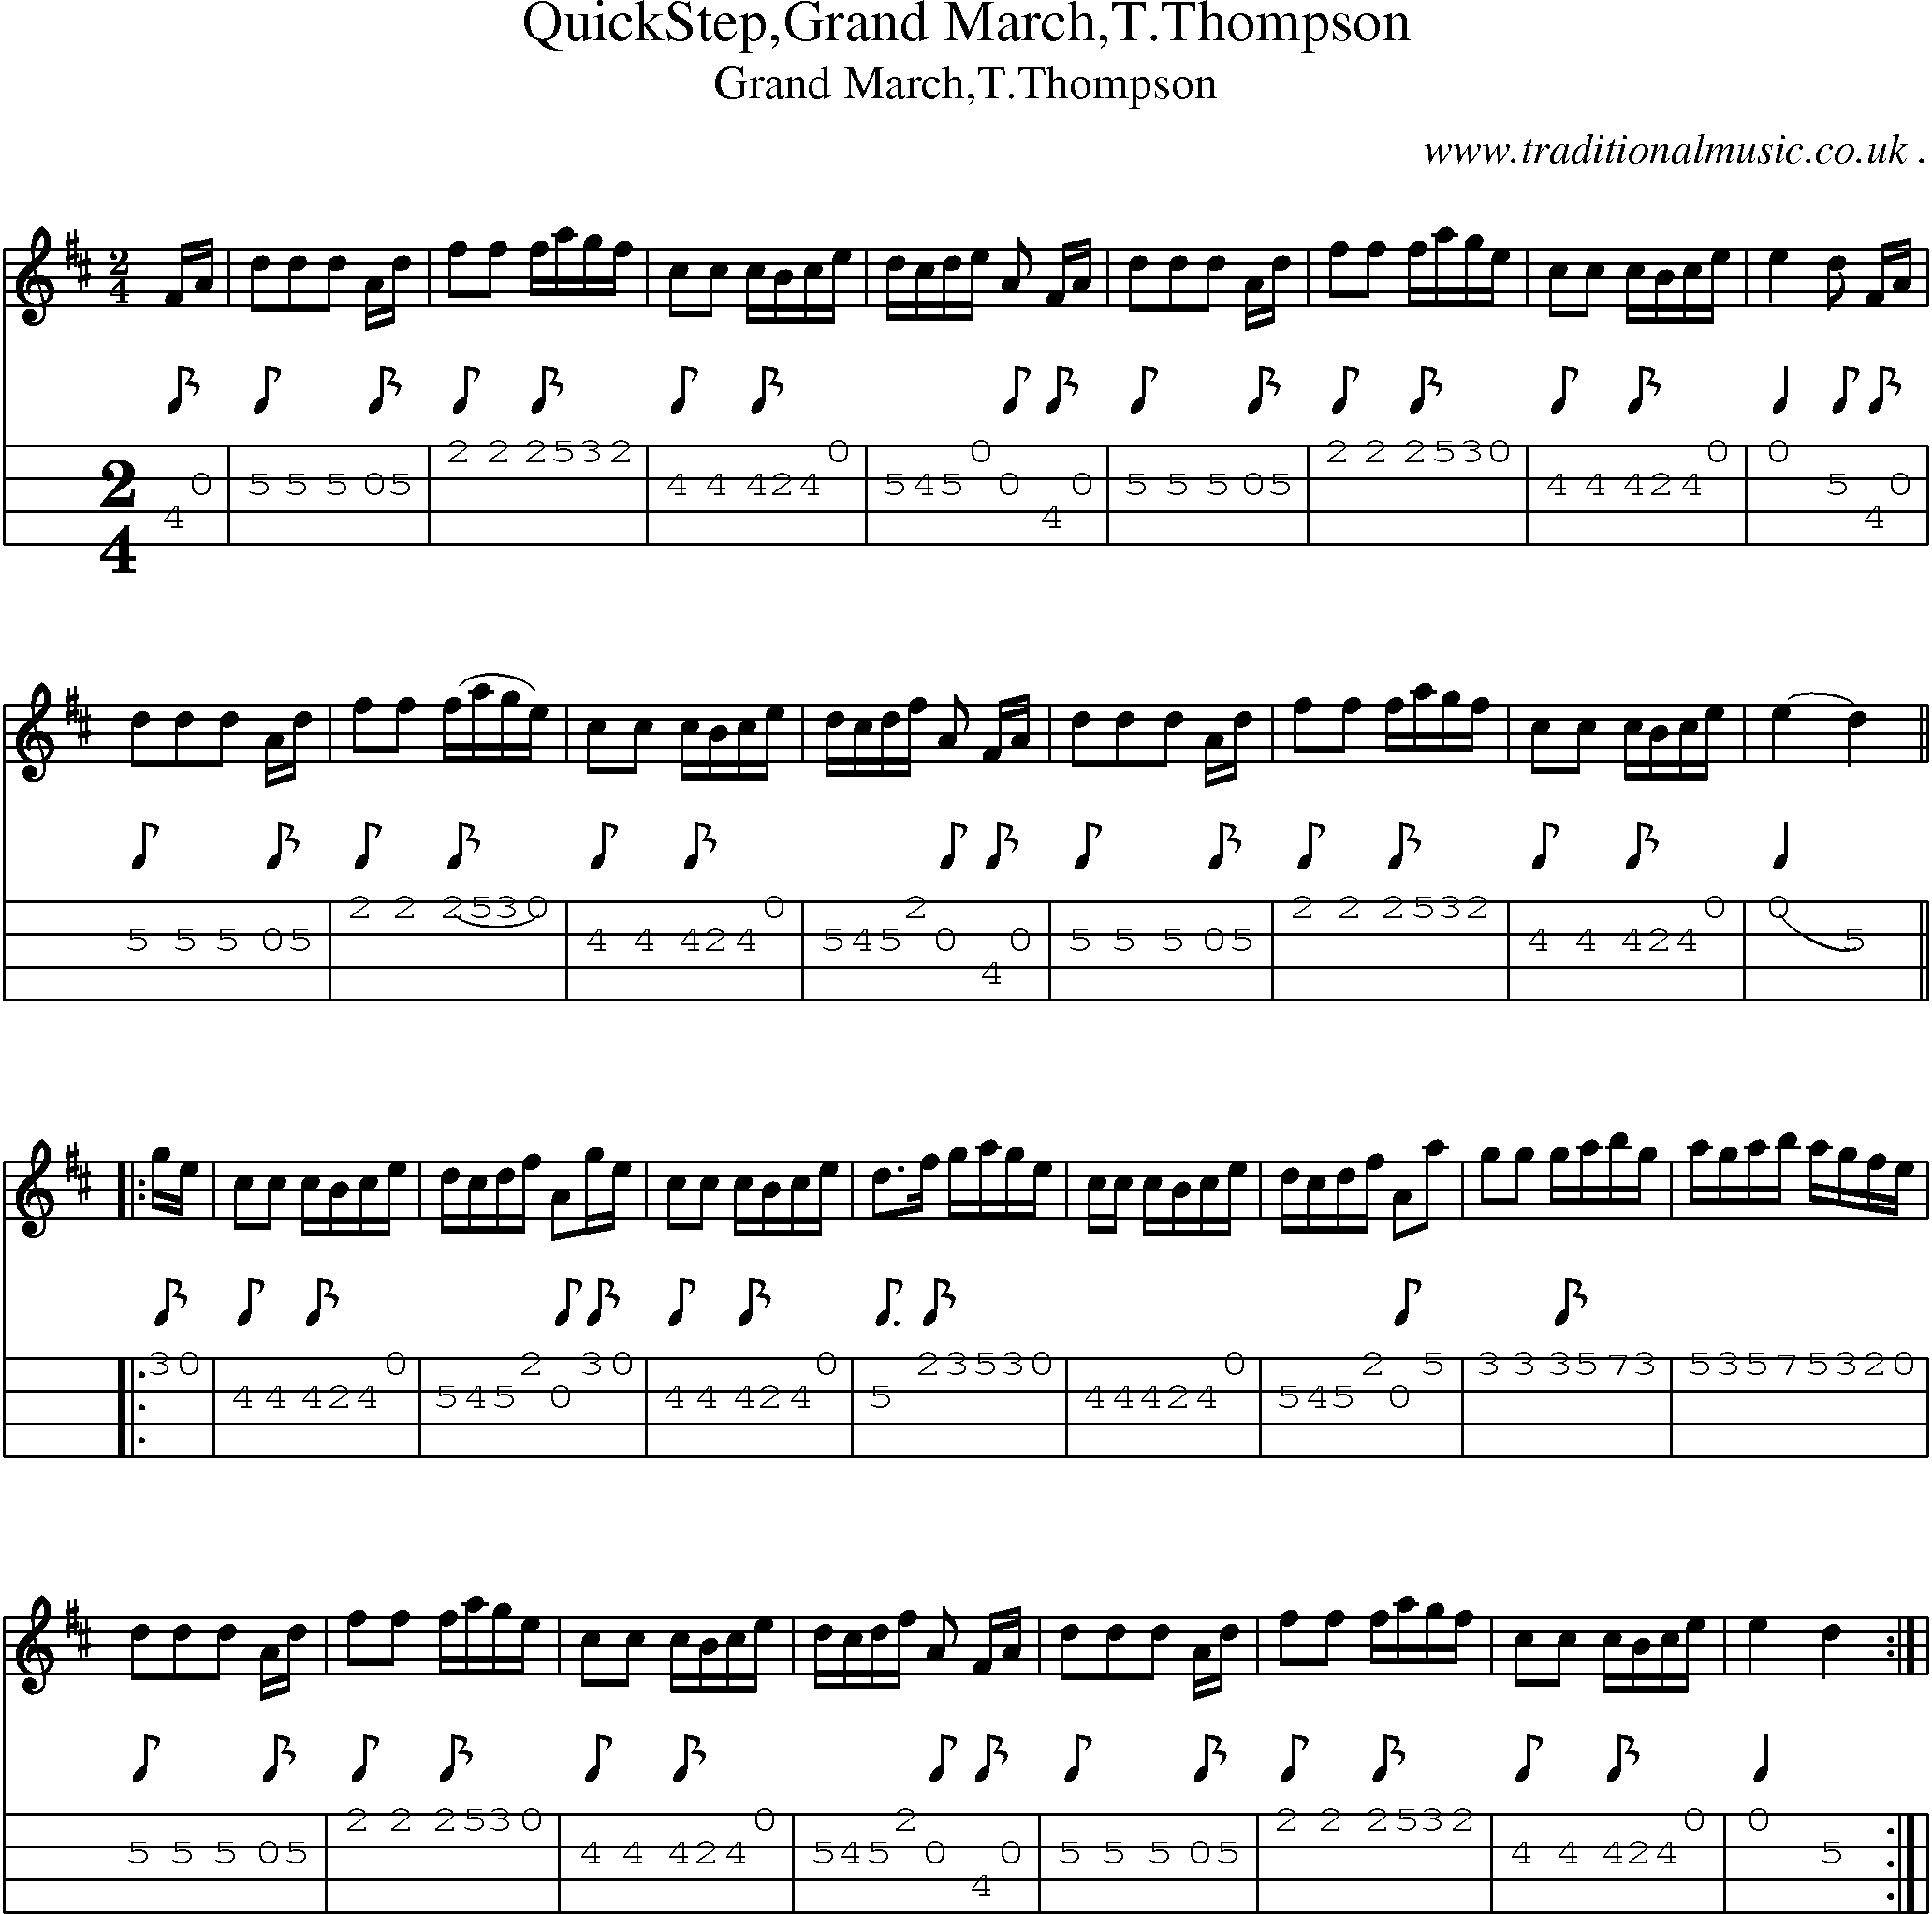 Sheet-Music and Mandolin Tabs for Quickstepgrand Marchtthompson